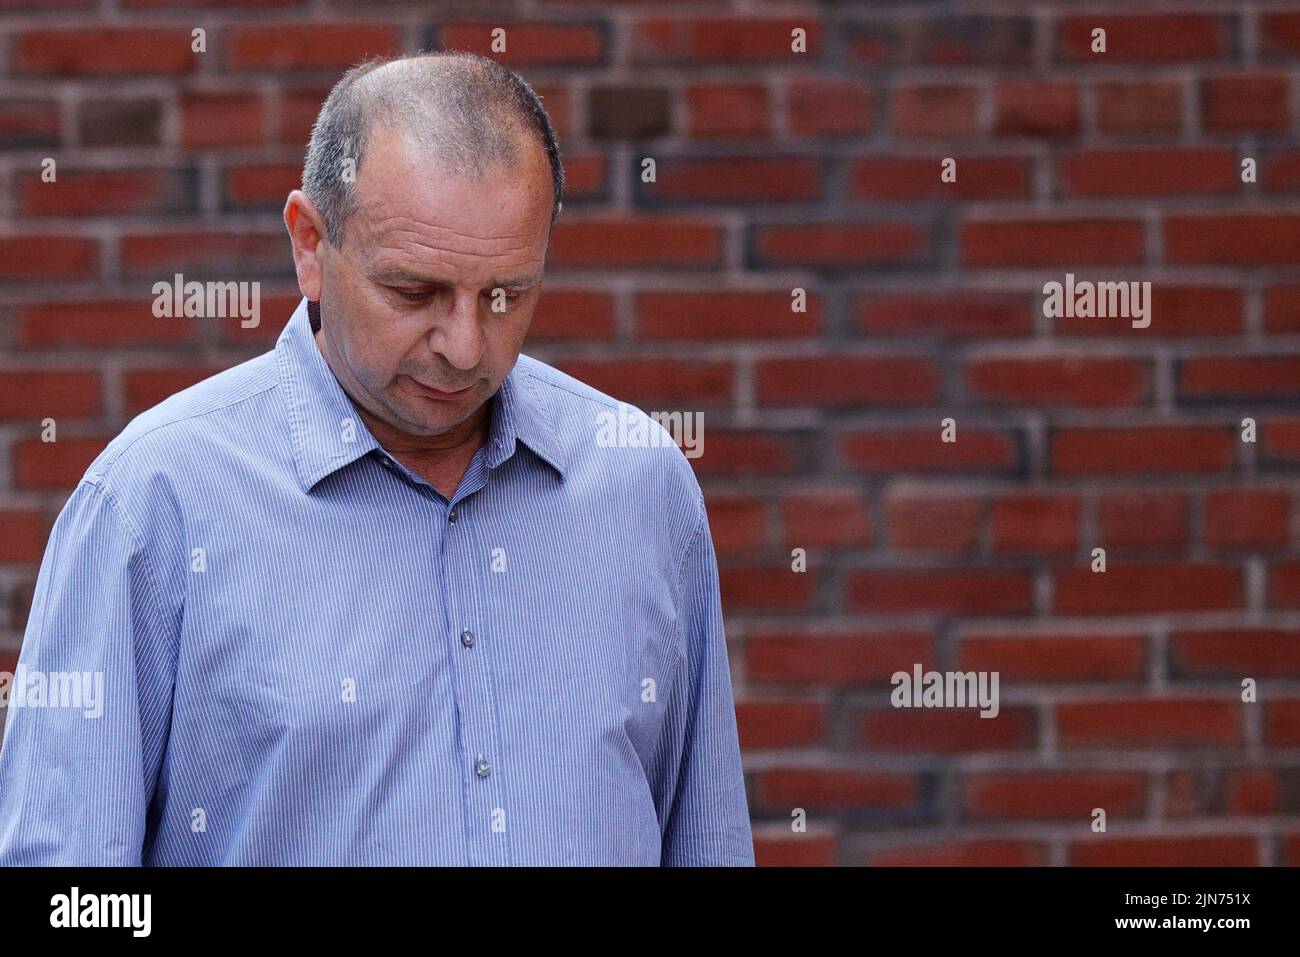 Igor Dvorskiy, a former college entrance exam administrator, arrives at the federal courthouse for a hearing for his role in the vast U.S. college admissions fraud scheme called 'Varsity Blues,' in Boston, Massachusetts, U.S., August 9, 2022.   REUTERS/Brian Snyder Stock Photo